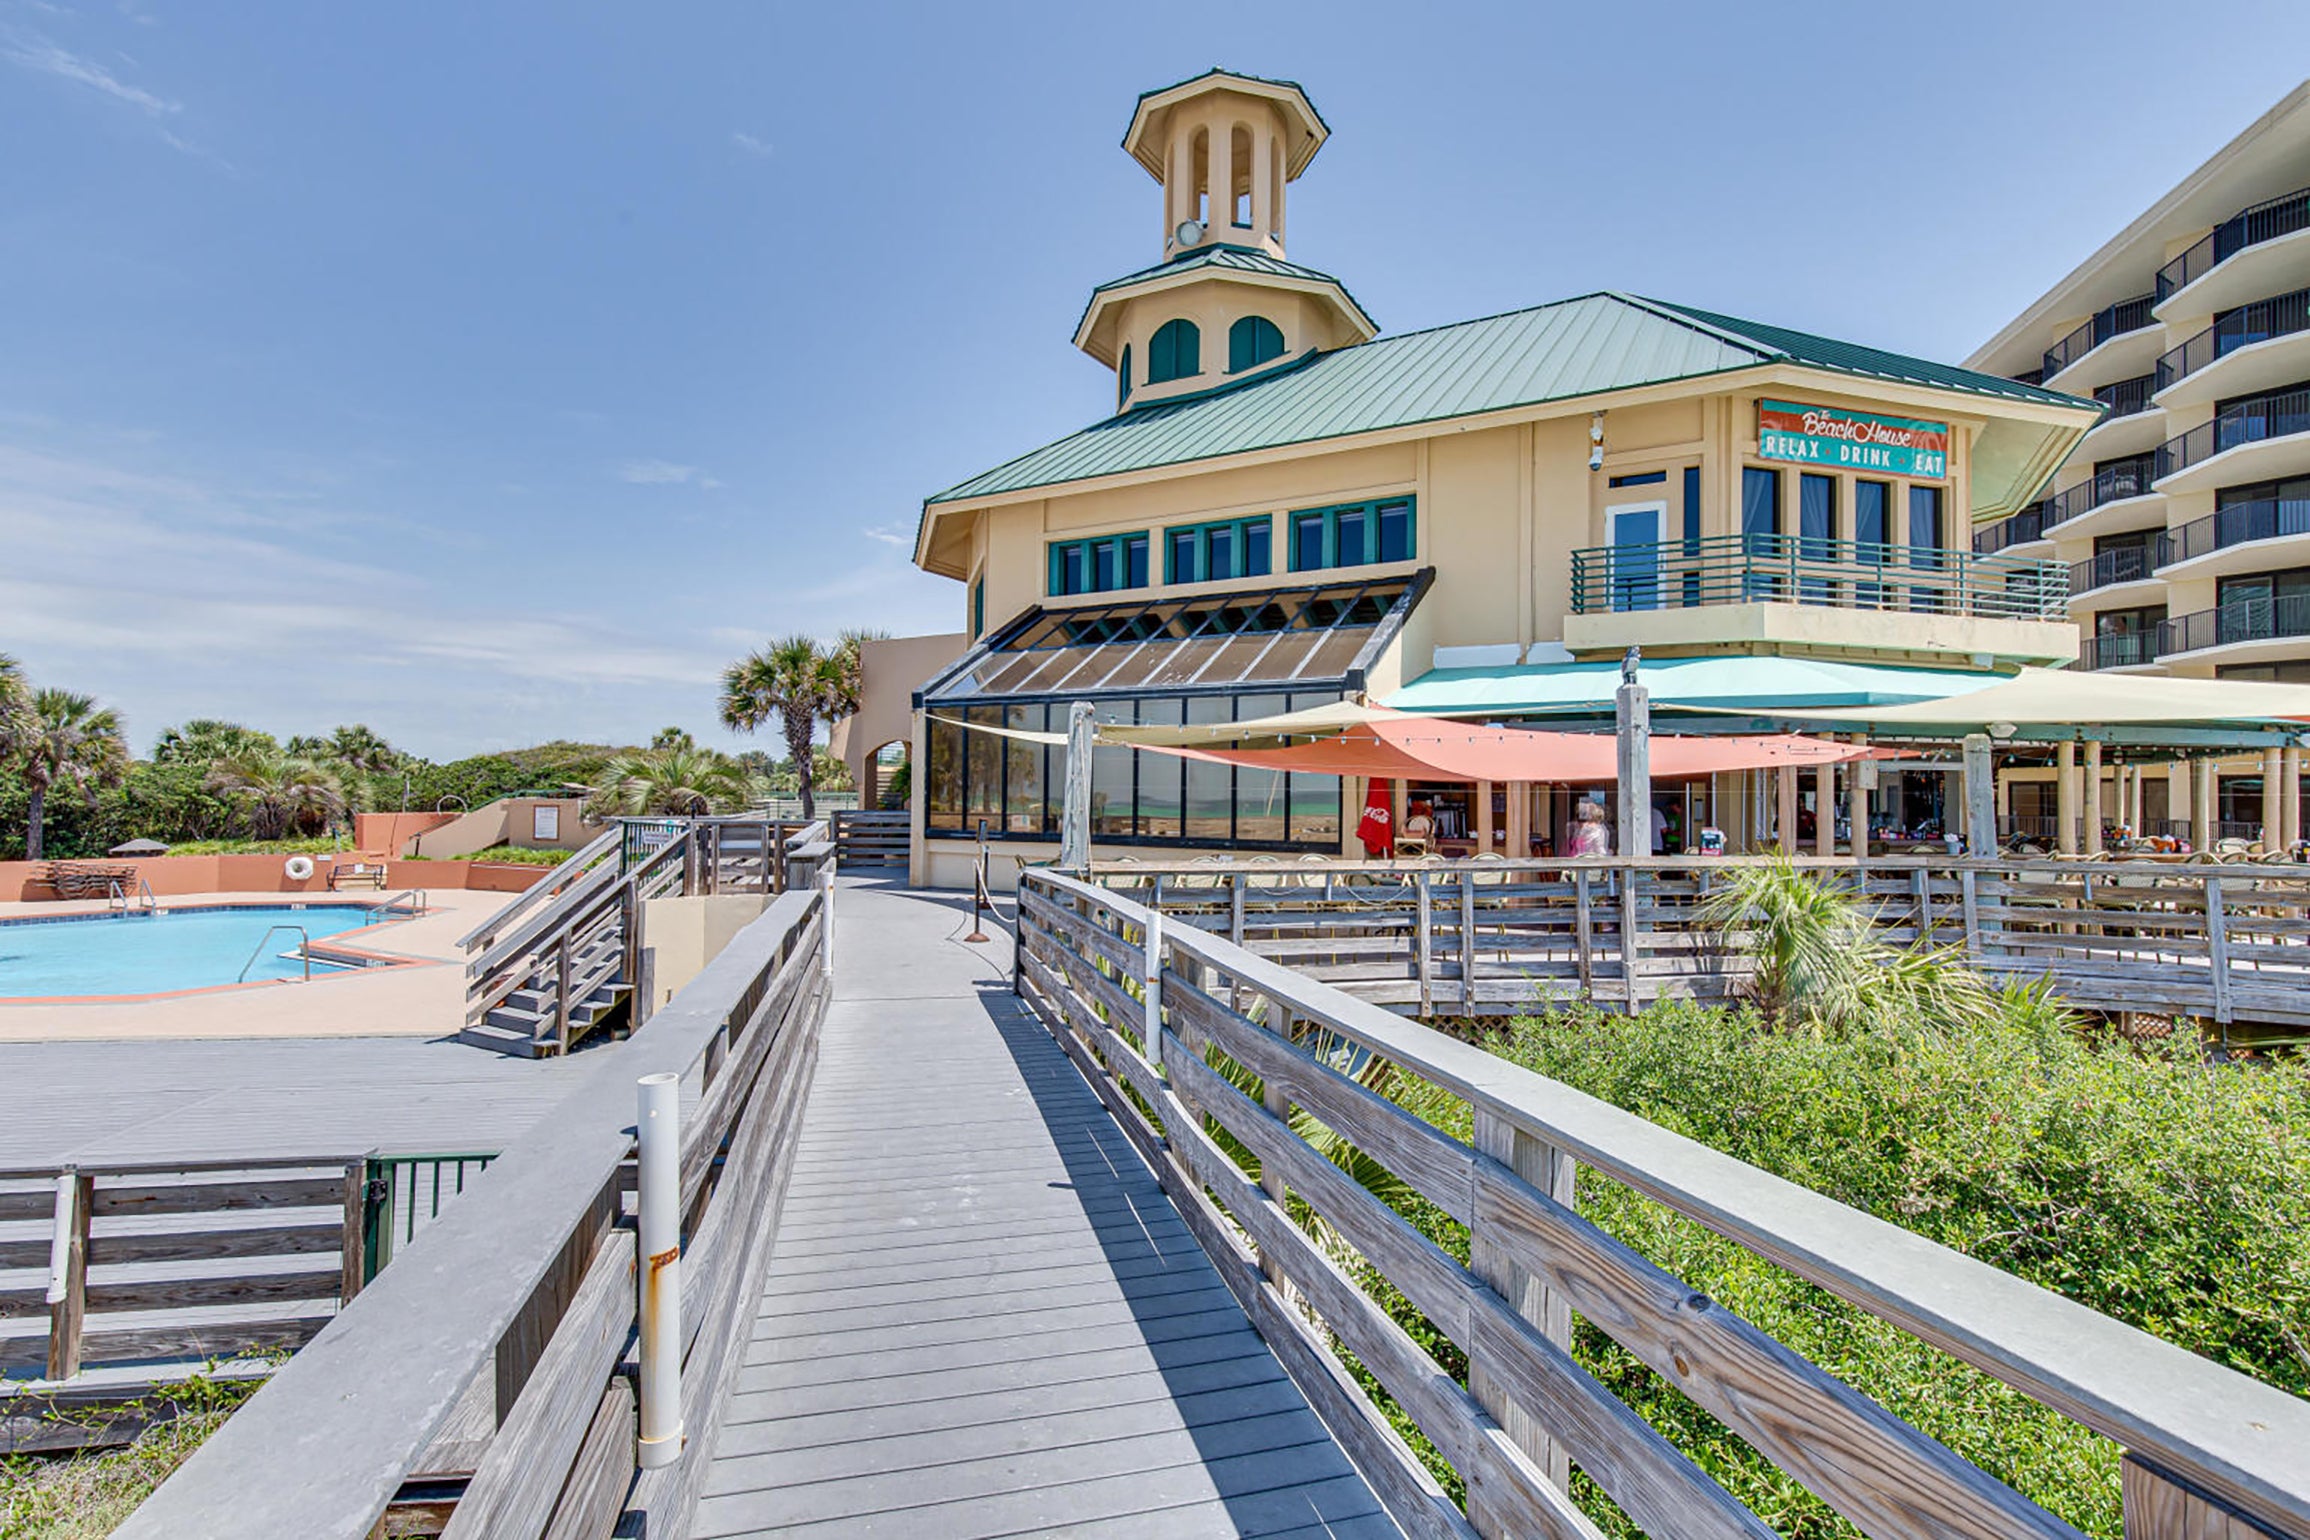 Grab a bite to eat at the Beach House